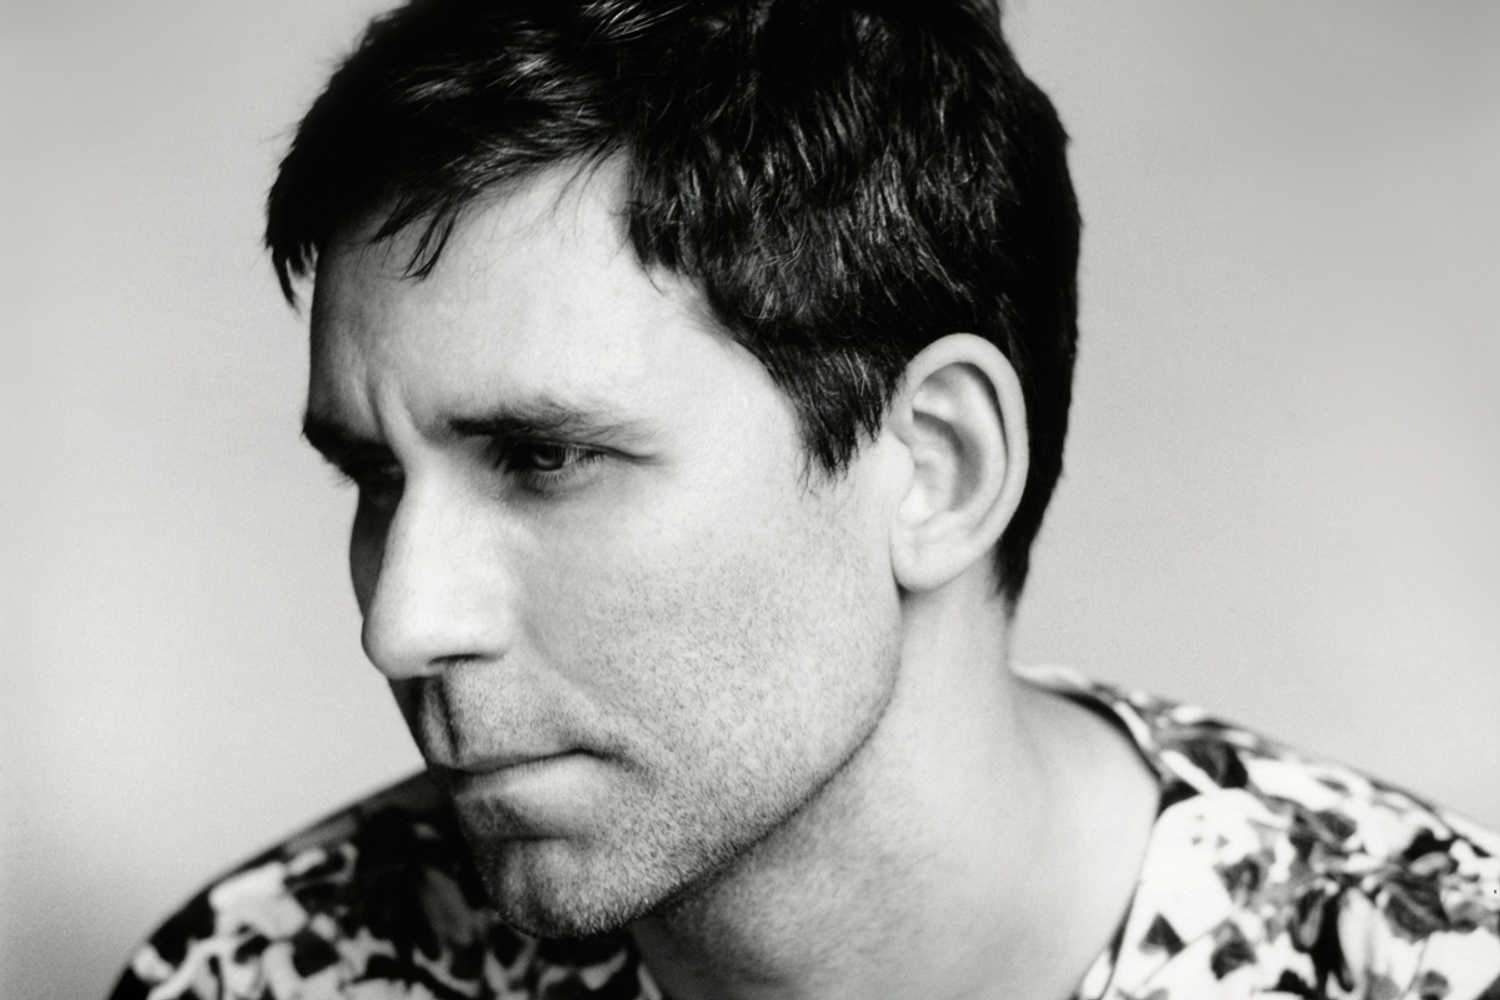 Jamie Lidell releases new track, ‘Believe In Me’